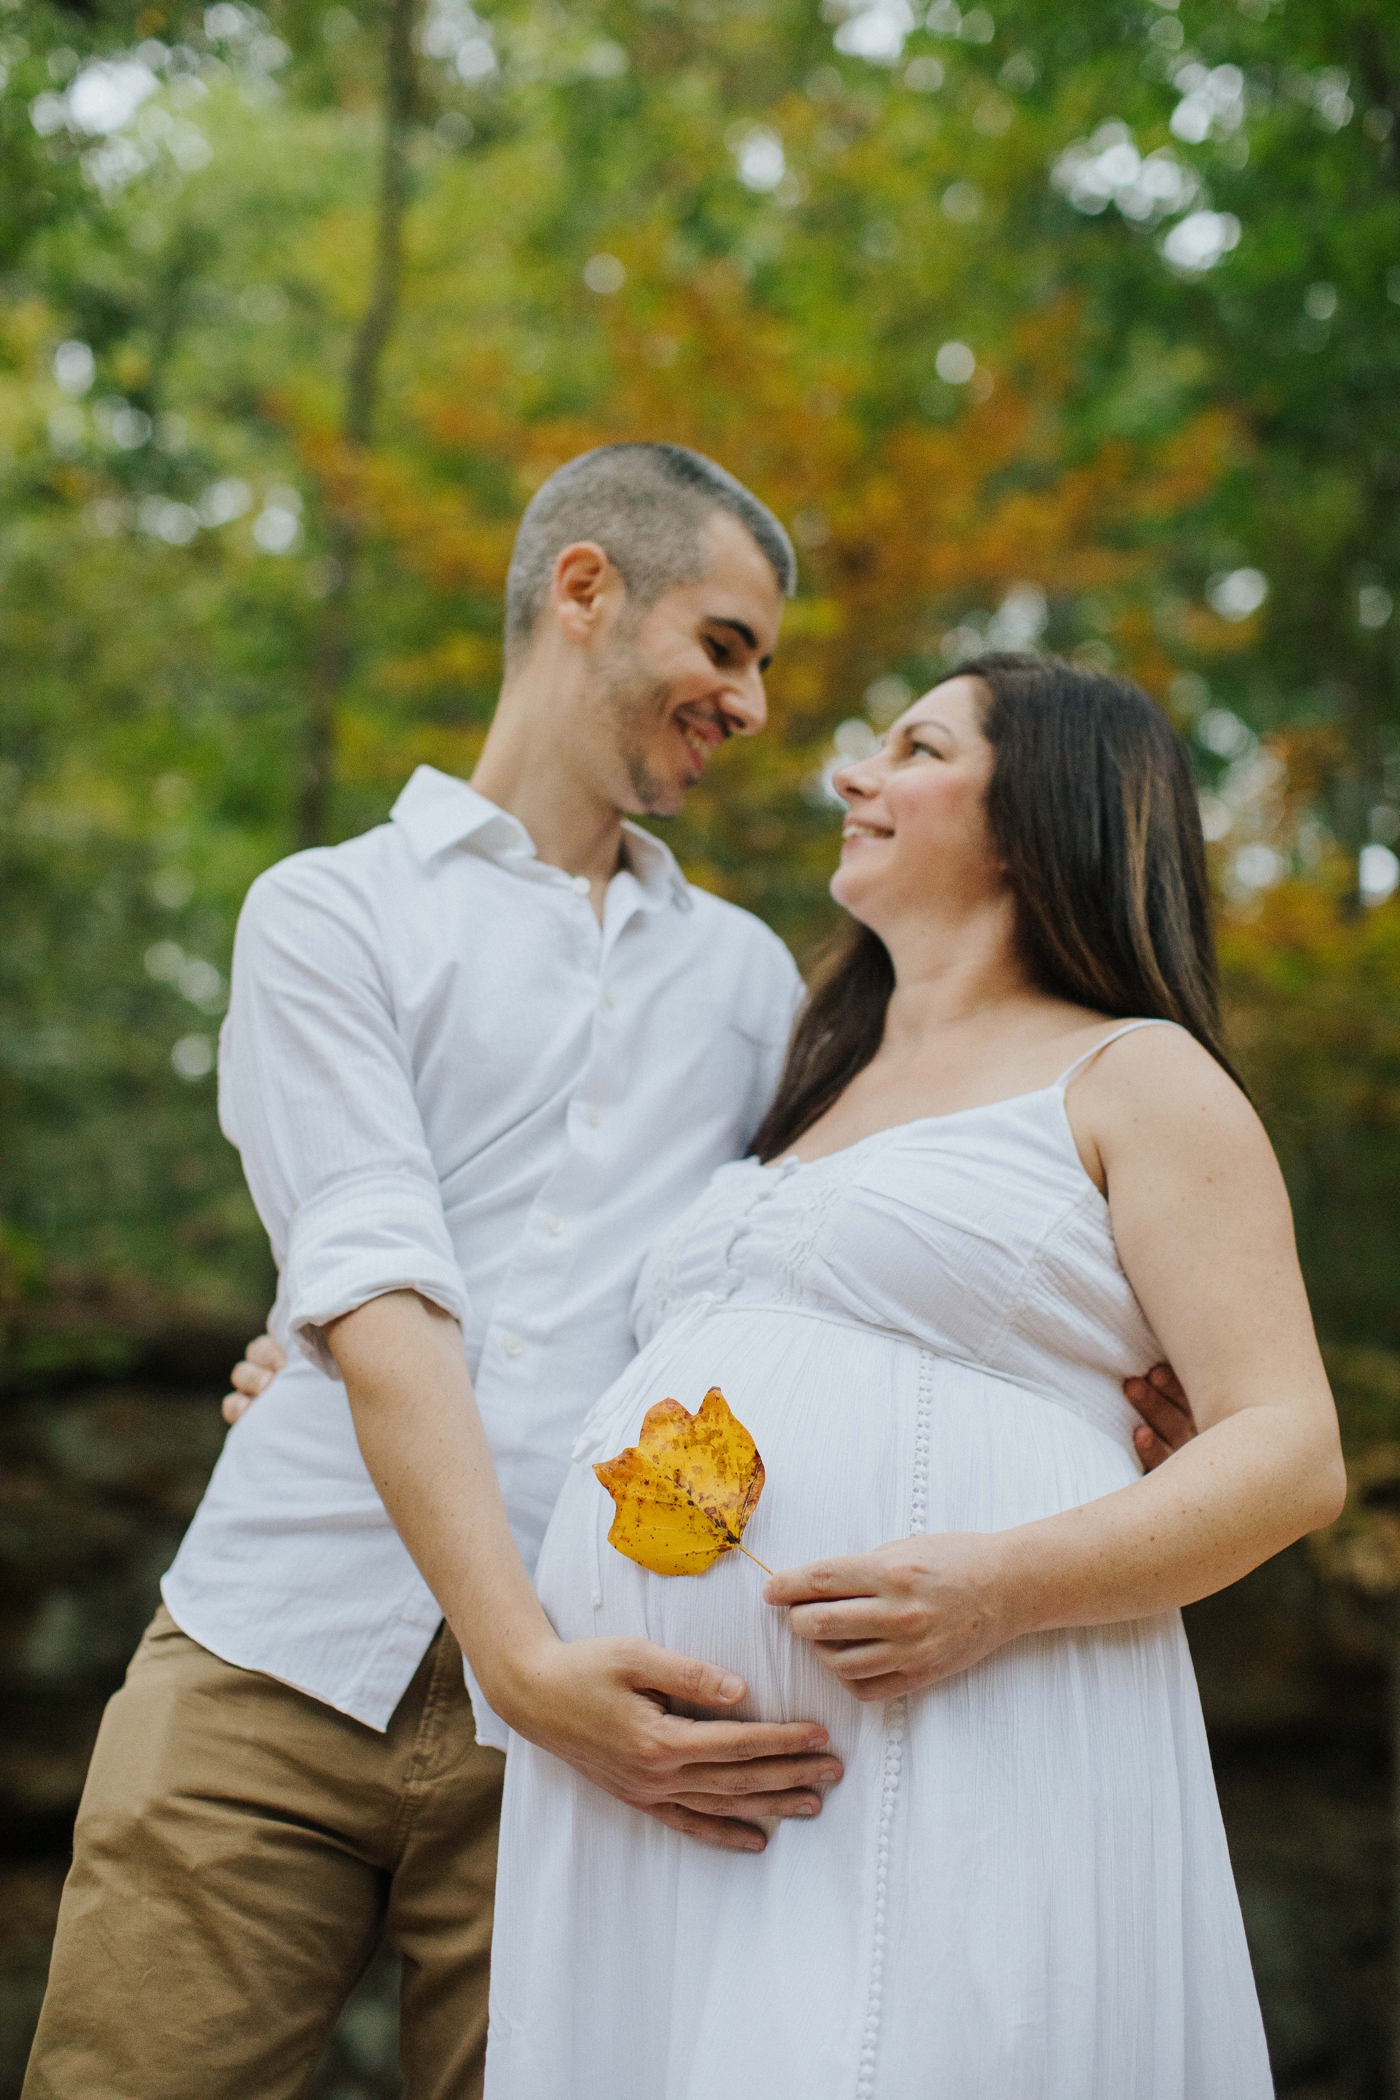 Alison & Tim’s Fall Maternity Session in Athens, Georgia at Ben Burton Park | Izzy and Co.